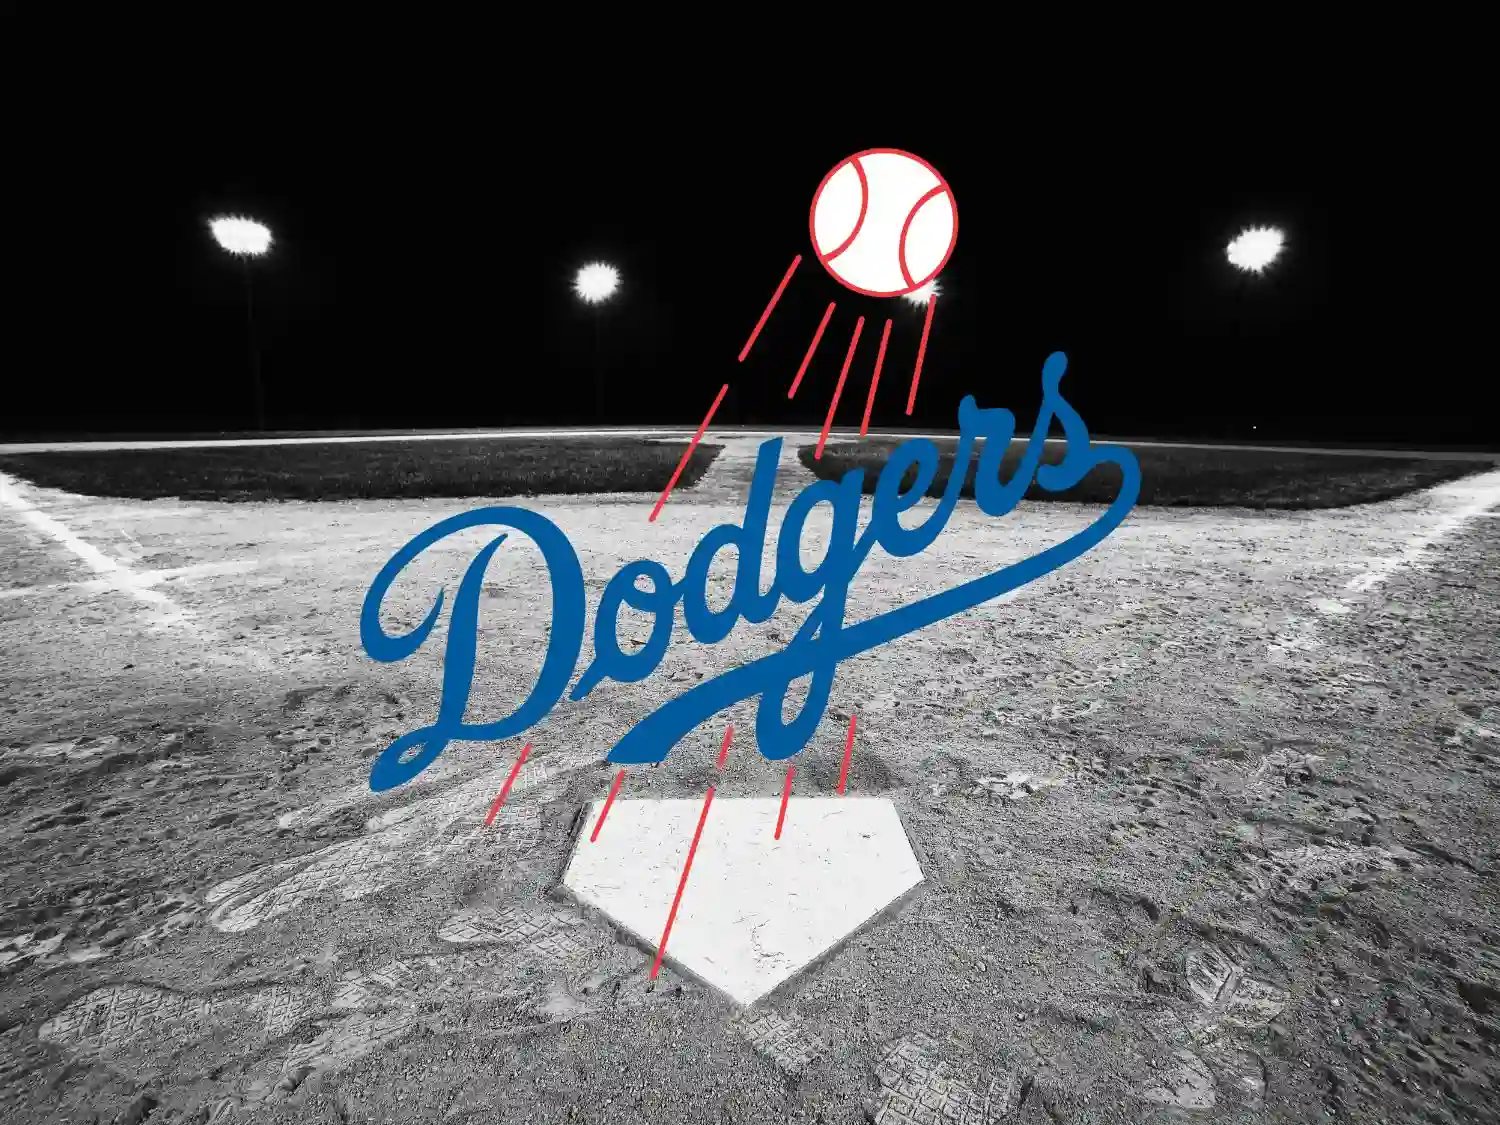 Los Angeles Dodgers Tickets and Seats